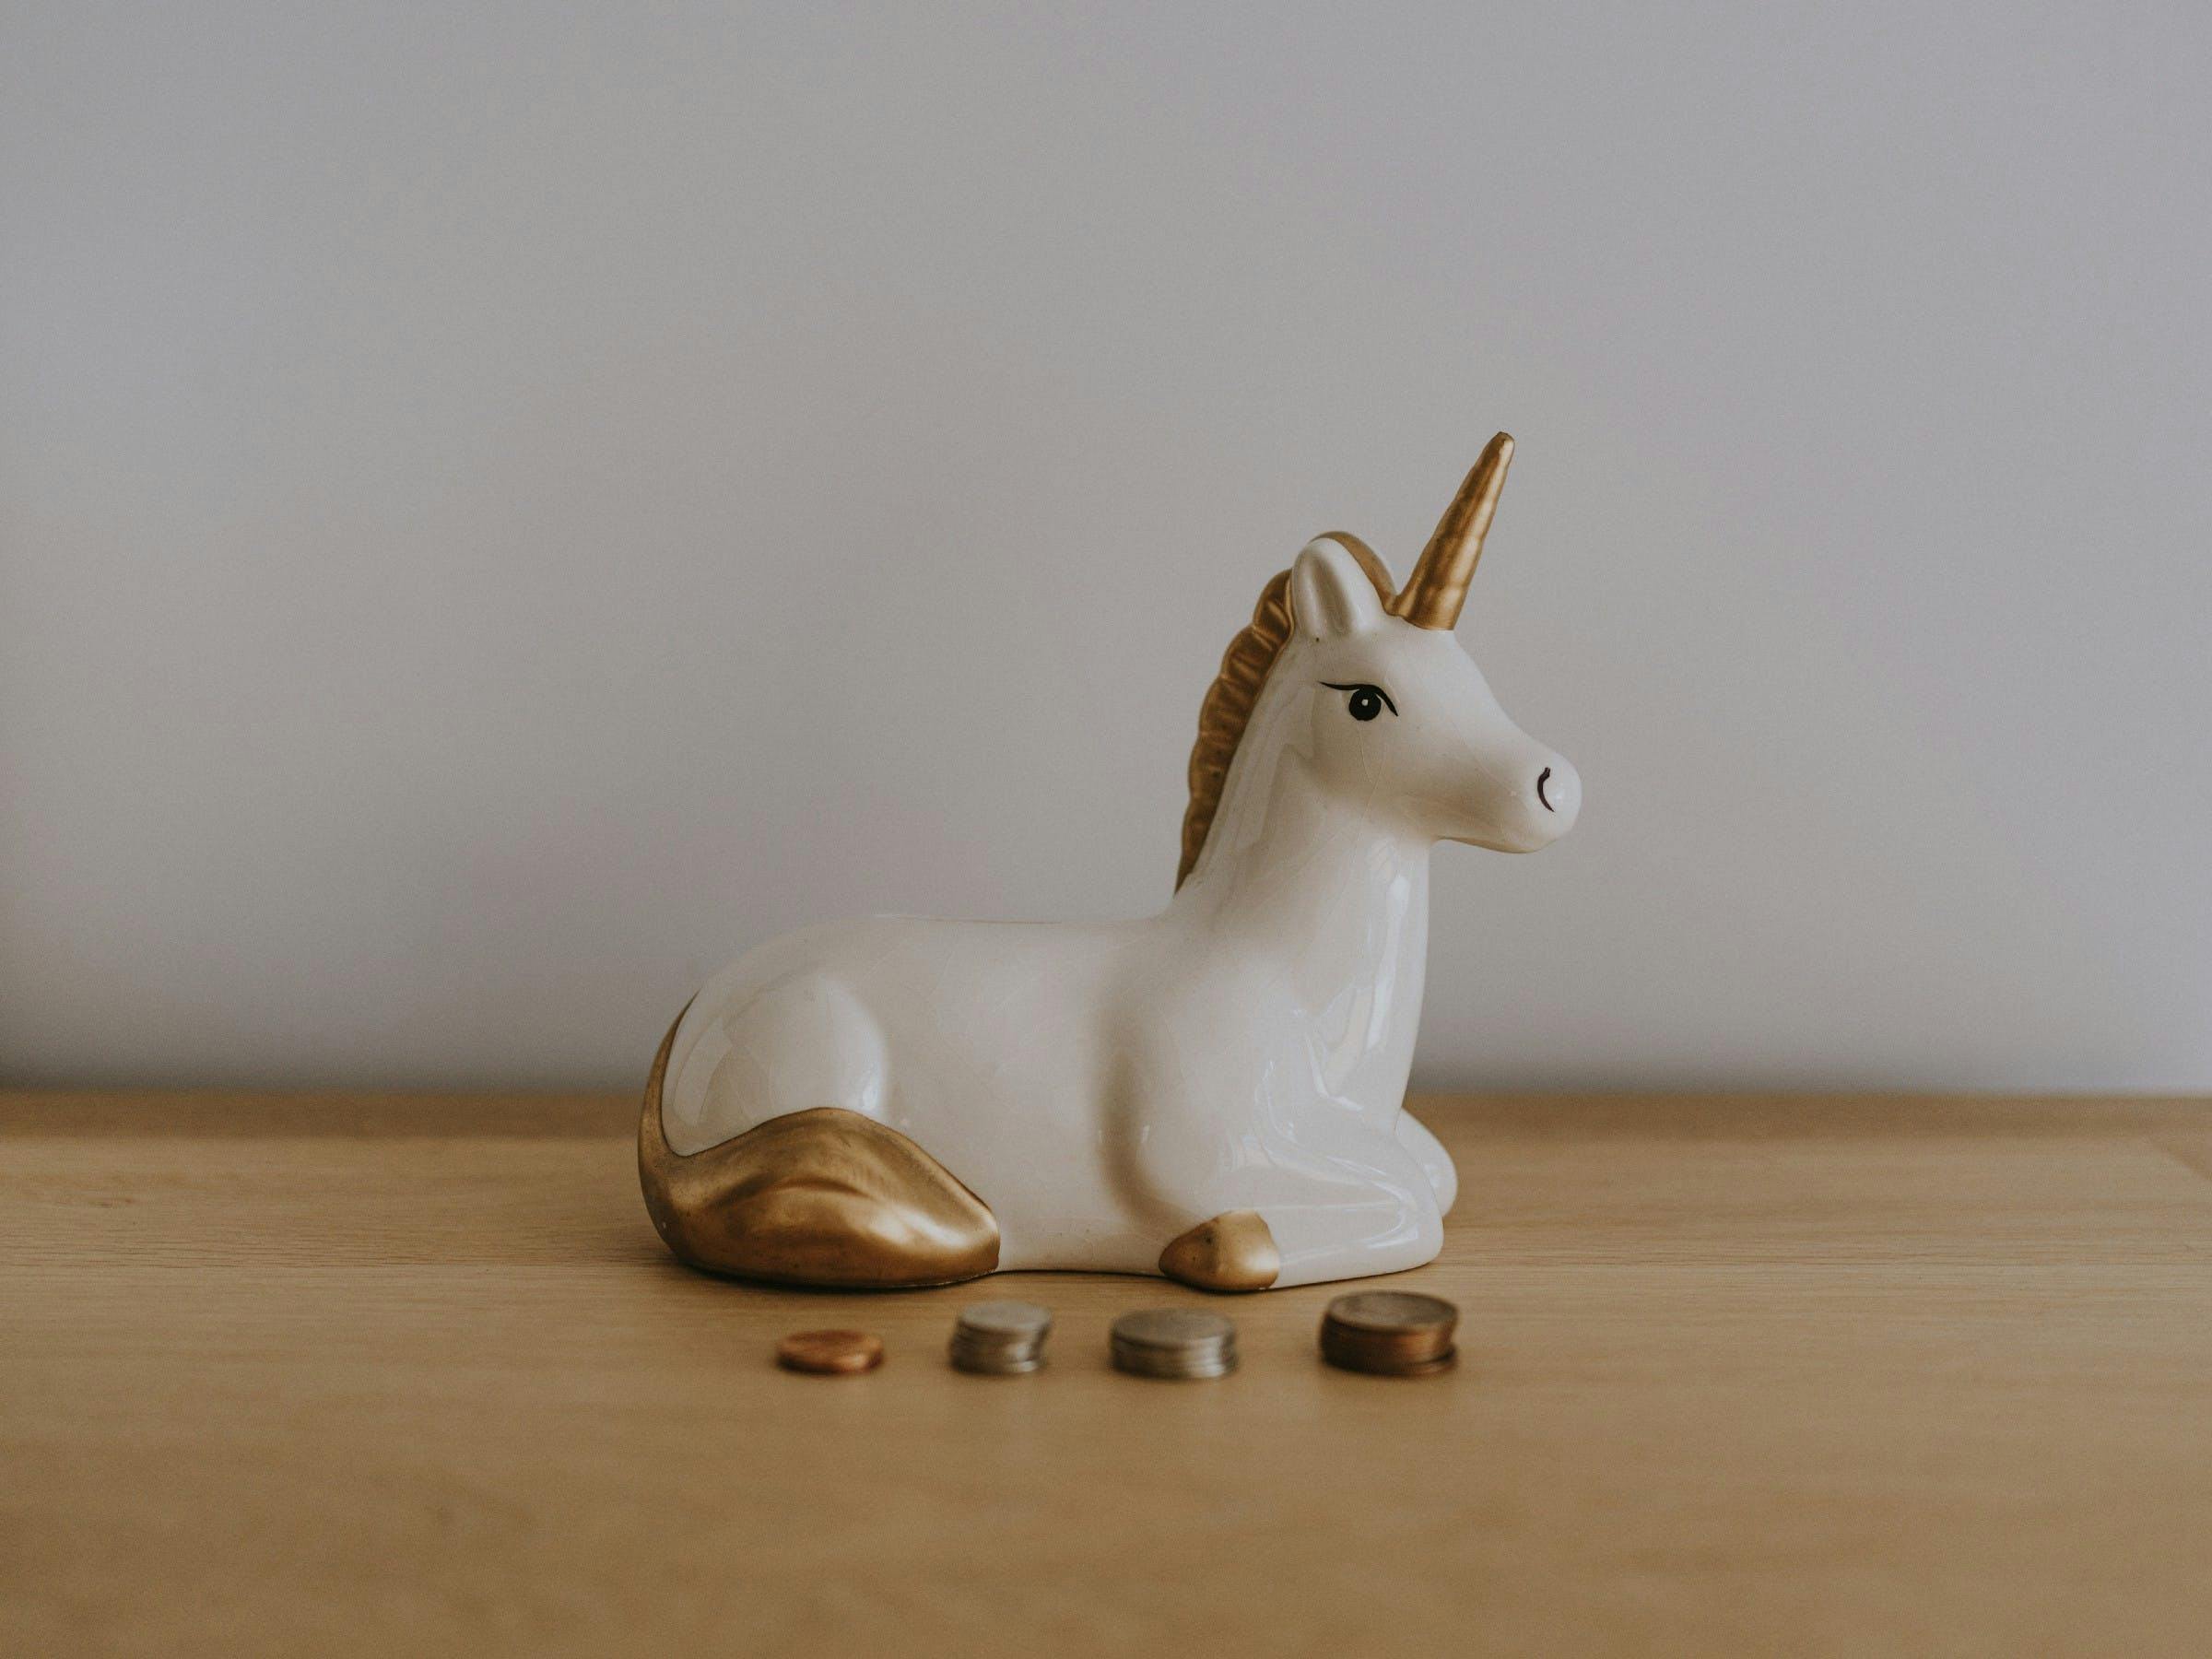 Stock image of Pennies and Unicorn